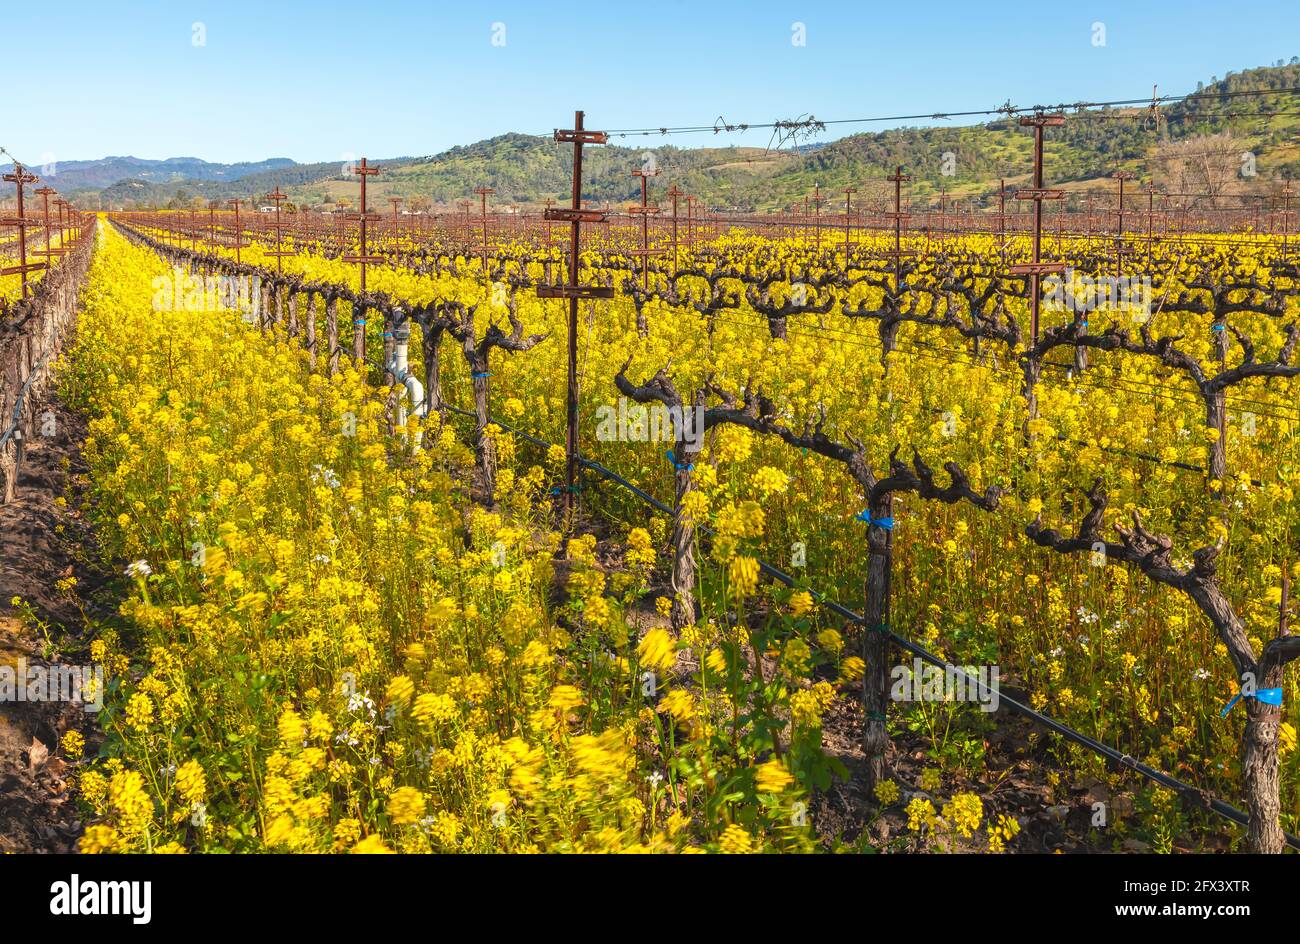 Blooming field mustard and the grapevines in early spring, Napa Valley, California, USA. Stock Photo